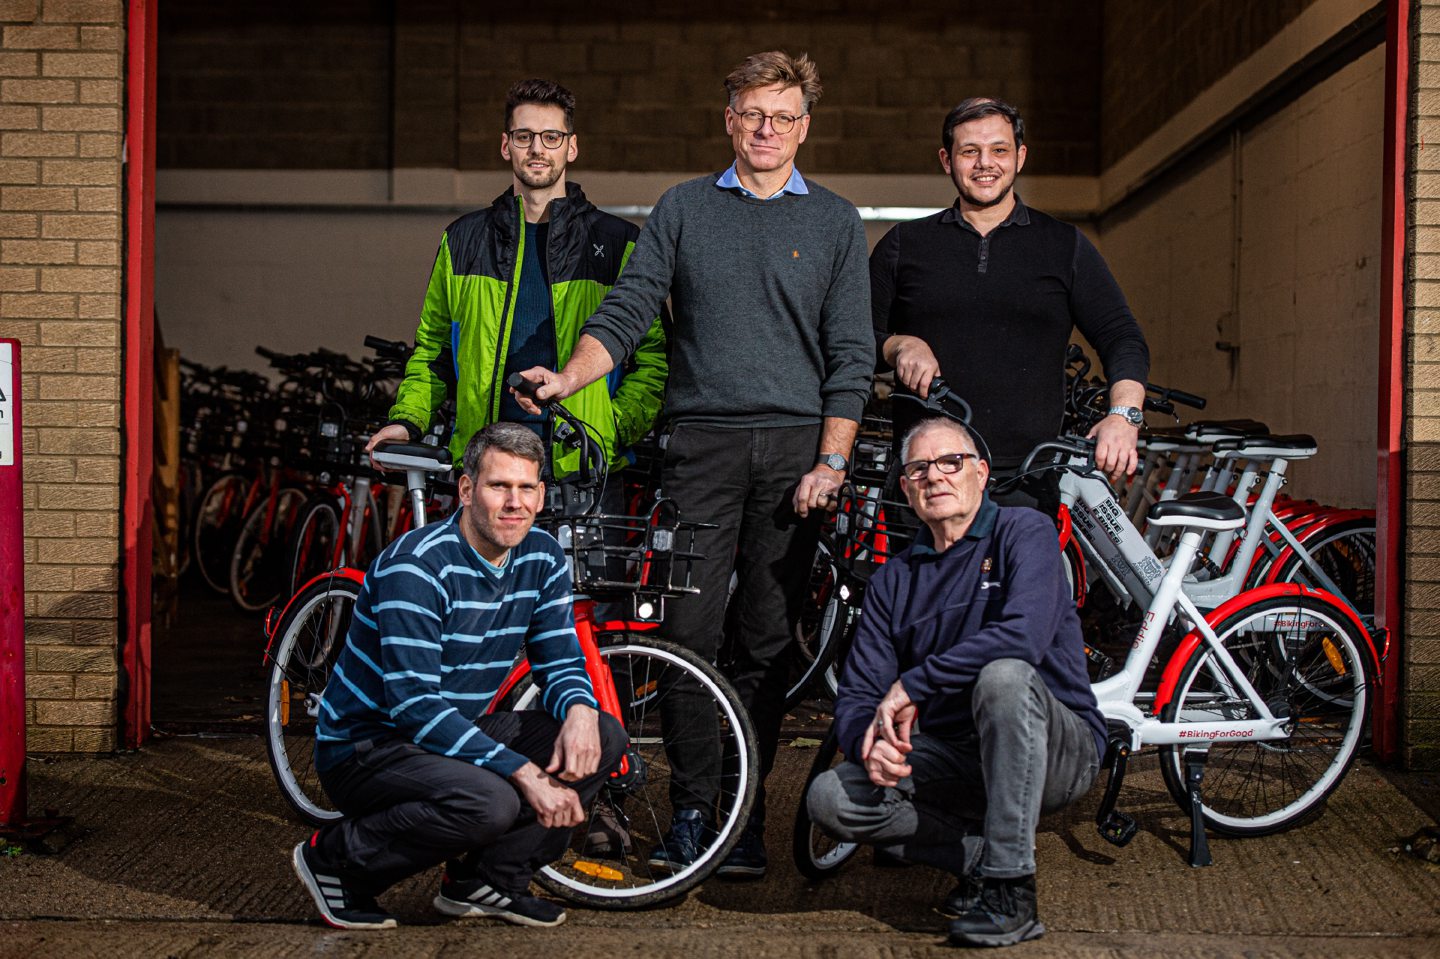 Jan Tore Endresen, centre, and clockwise from bottom left: Adam Gajdosy, Nicolo Silvani, Ayade Aljanabi, and Stuart Aitken who are the first employees of the eBikes venture